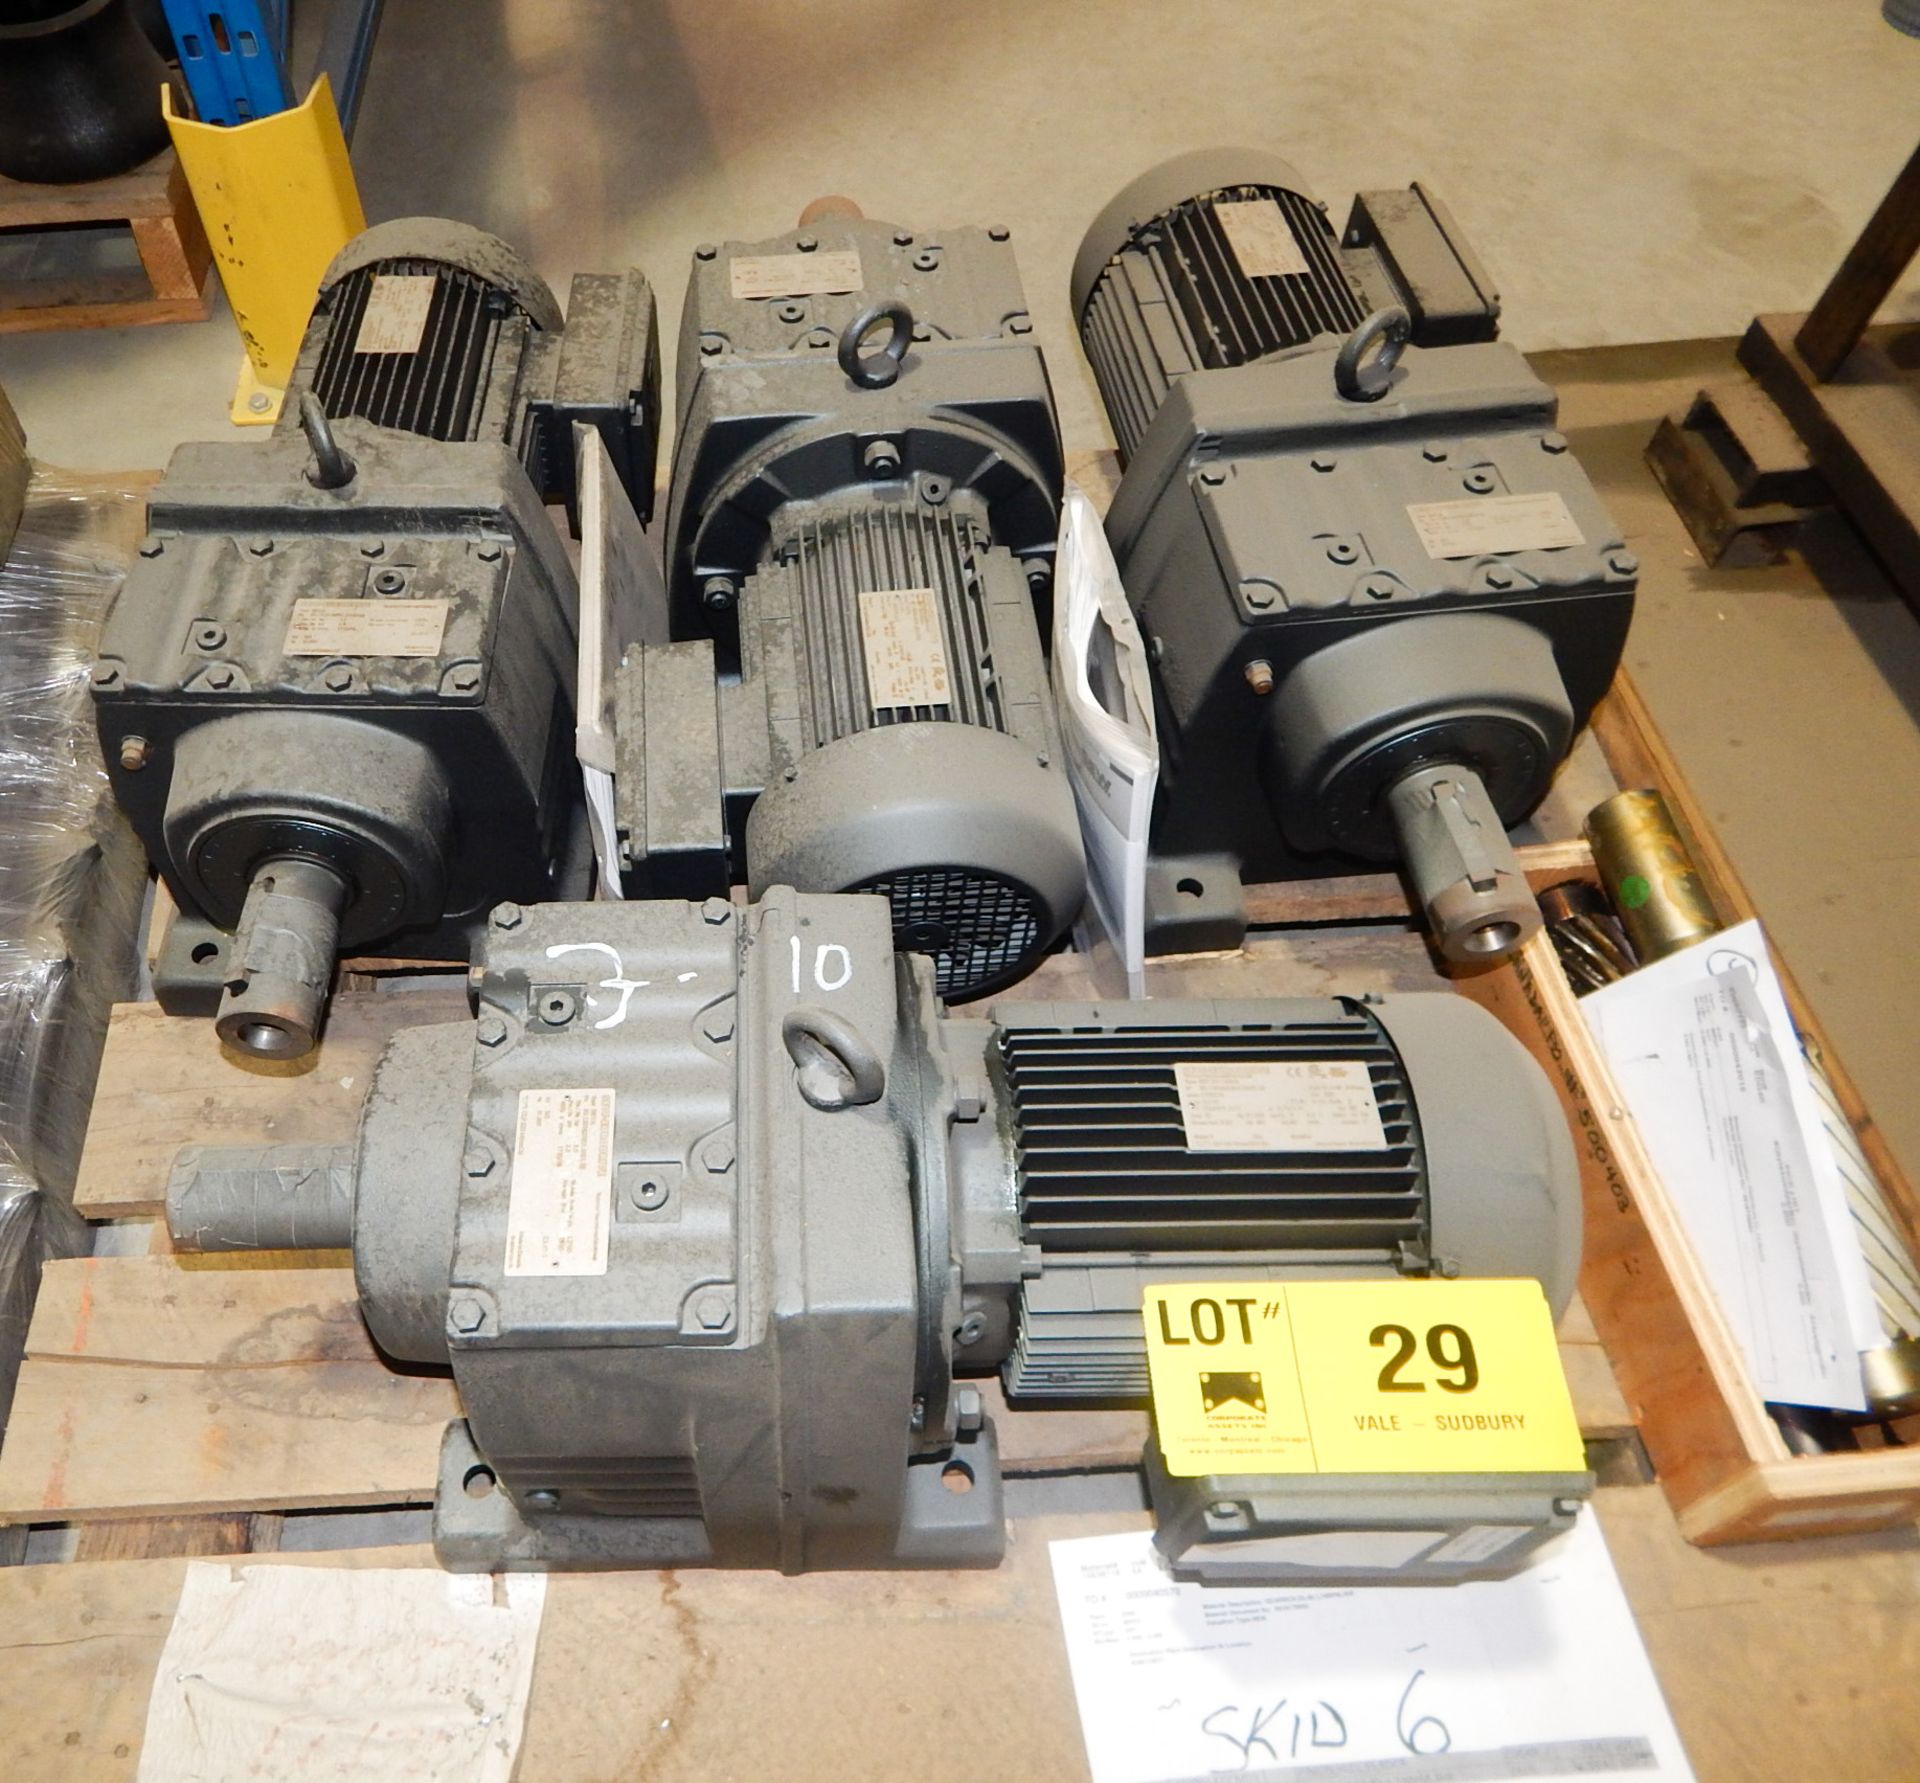 LOT/ SEW-EURODRIVE 23.4:1 RATIO GEARBOX WITH 3HP MOTOR (LOCATED AT AER WAREHOUSE)